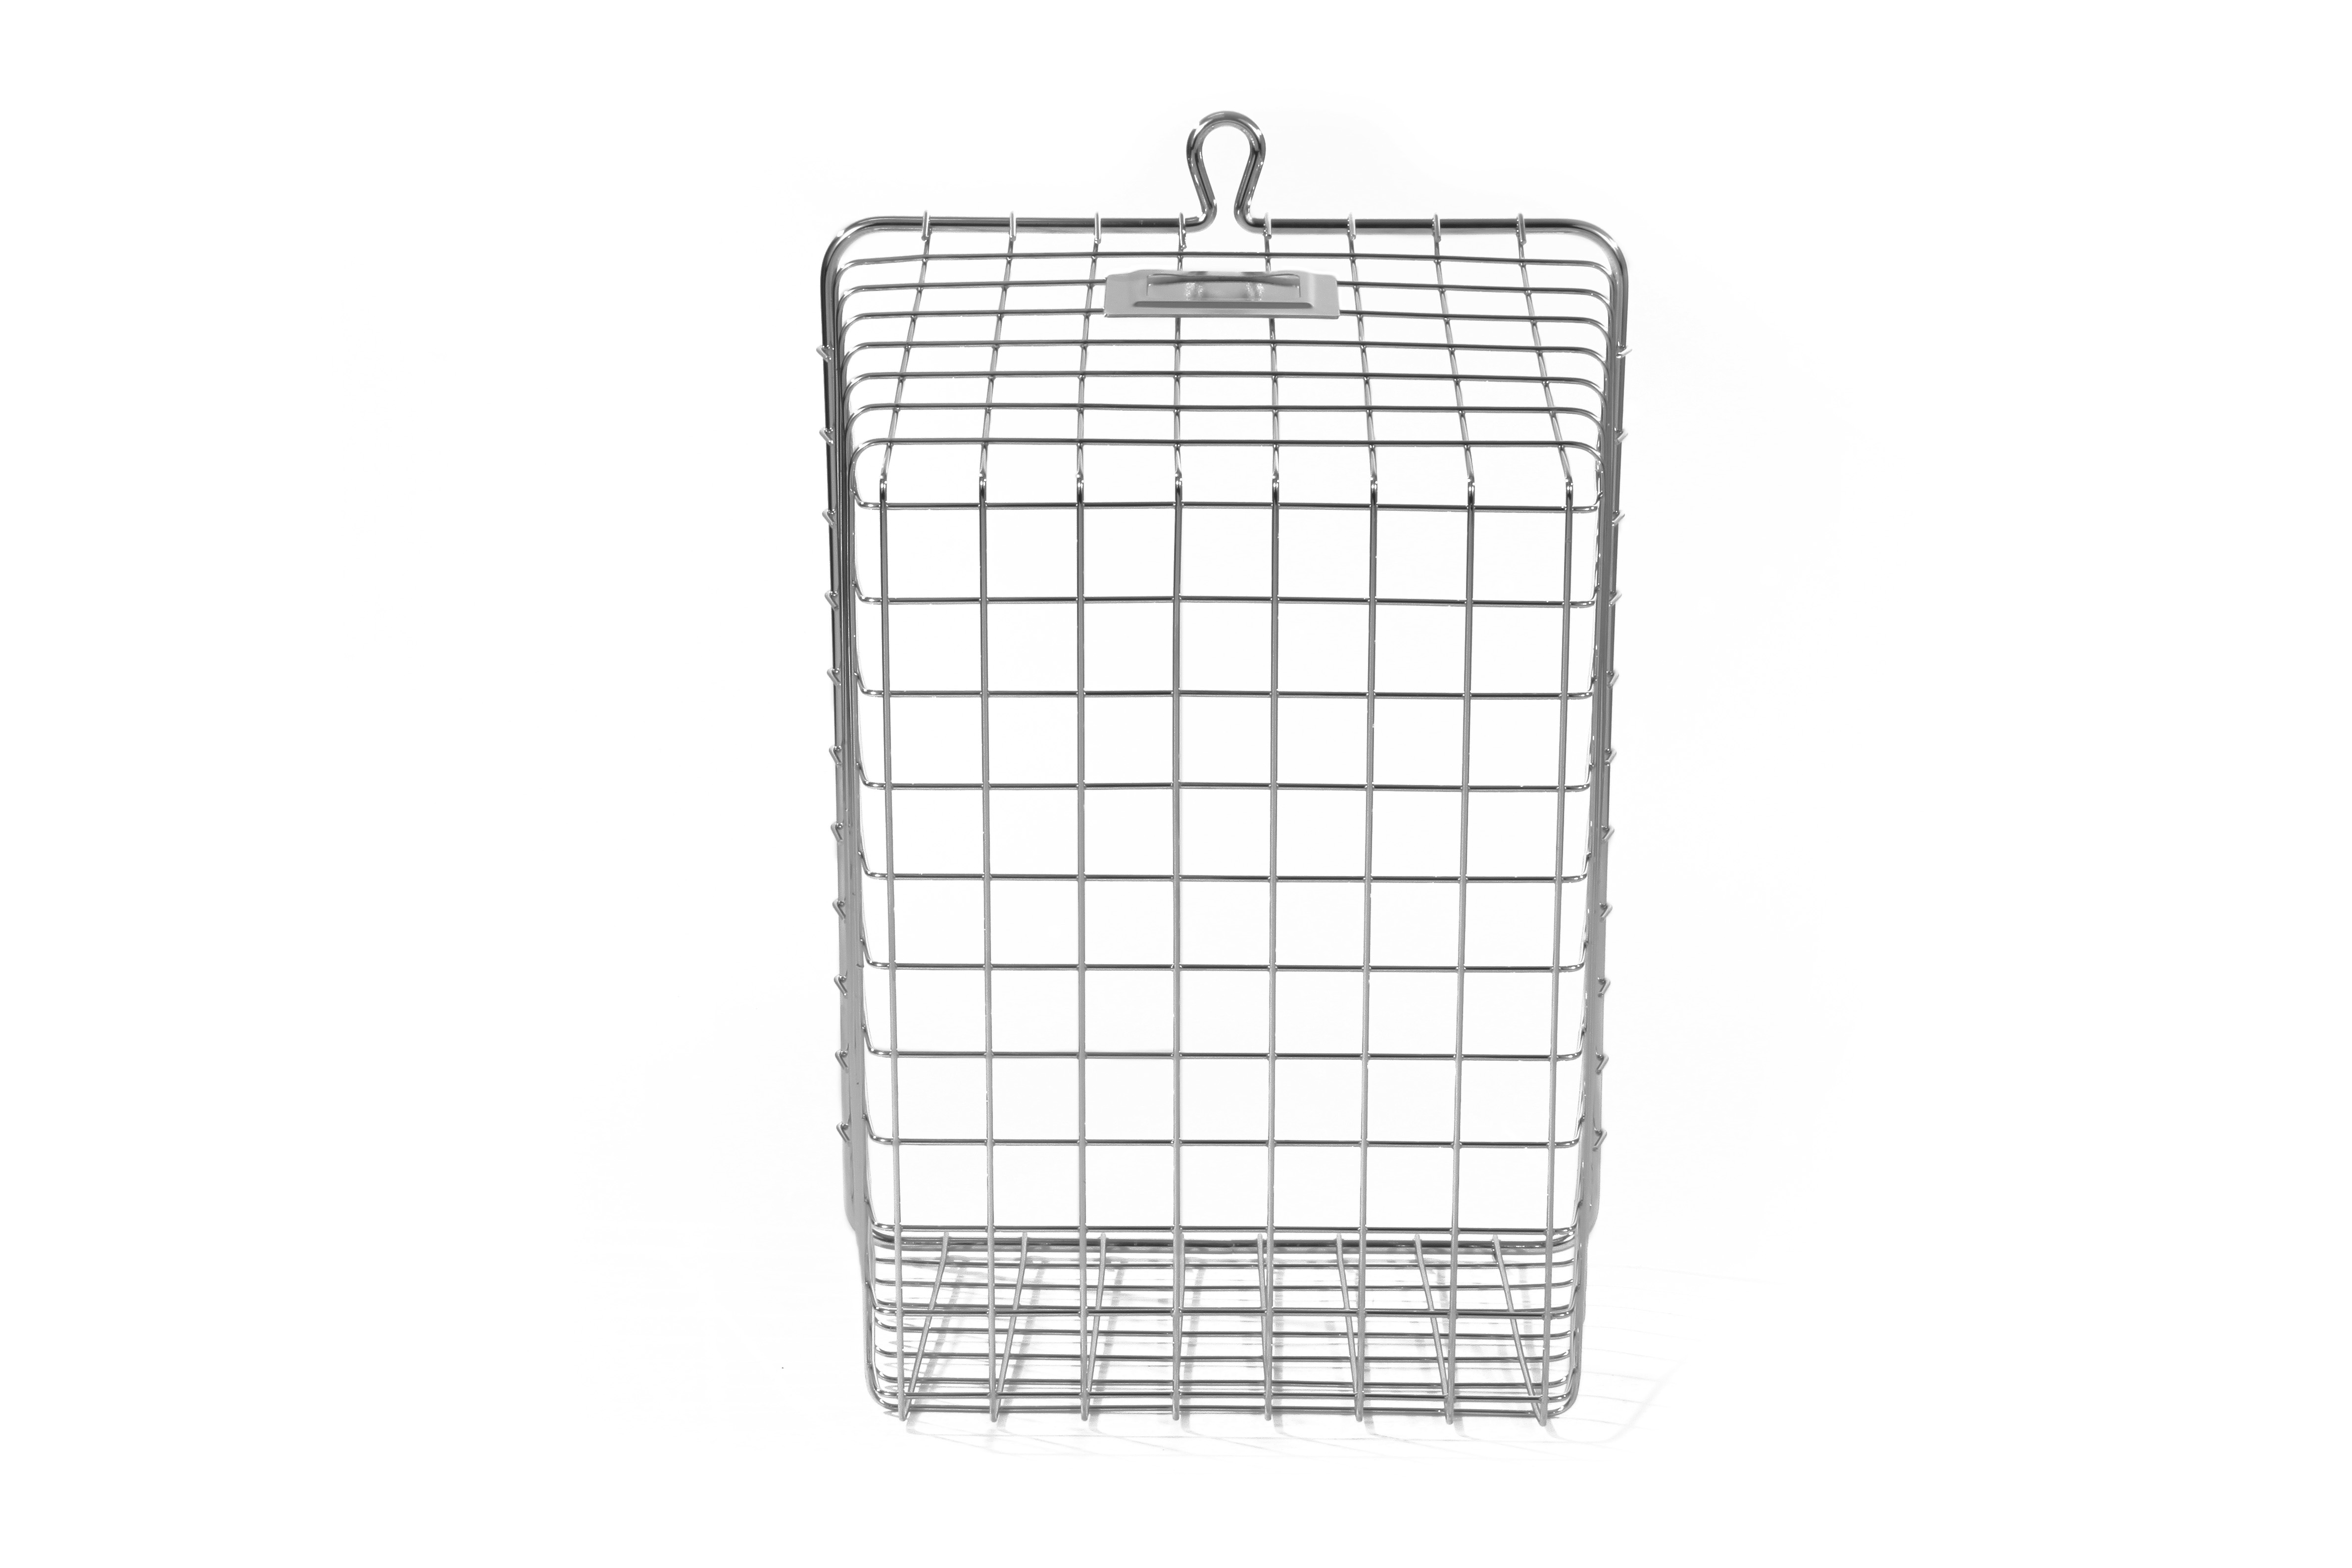 Spectrum Diversified Steel Wire Storage Basket Organizer for Closets, Pantry, Kitchen, Garage, Bathroom and More, Small, Chrome - image 4 of 8